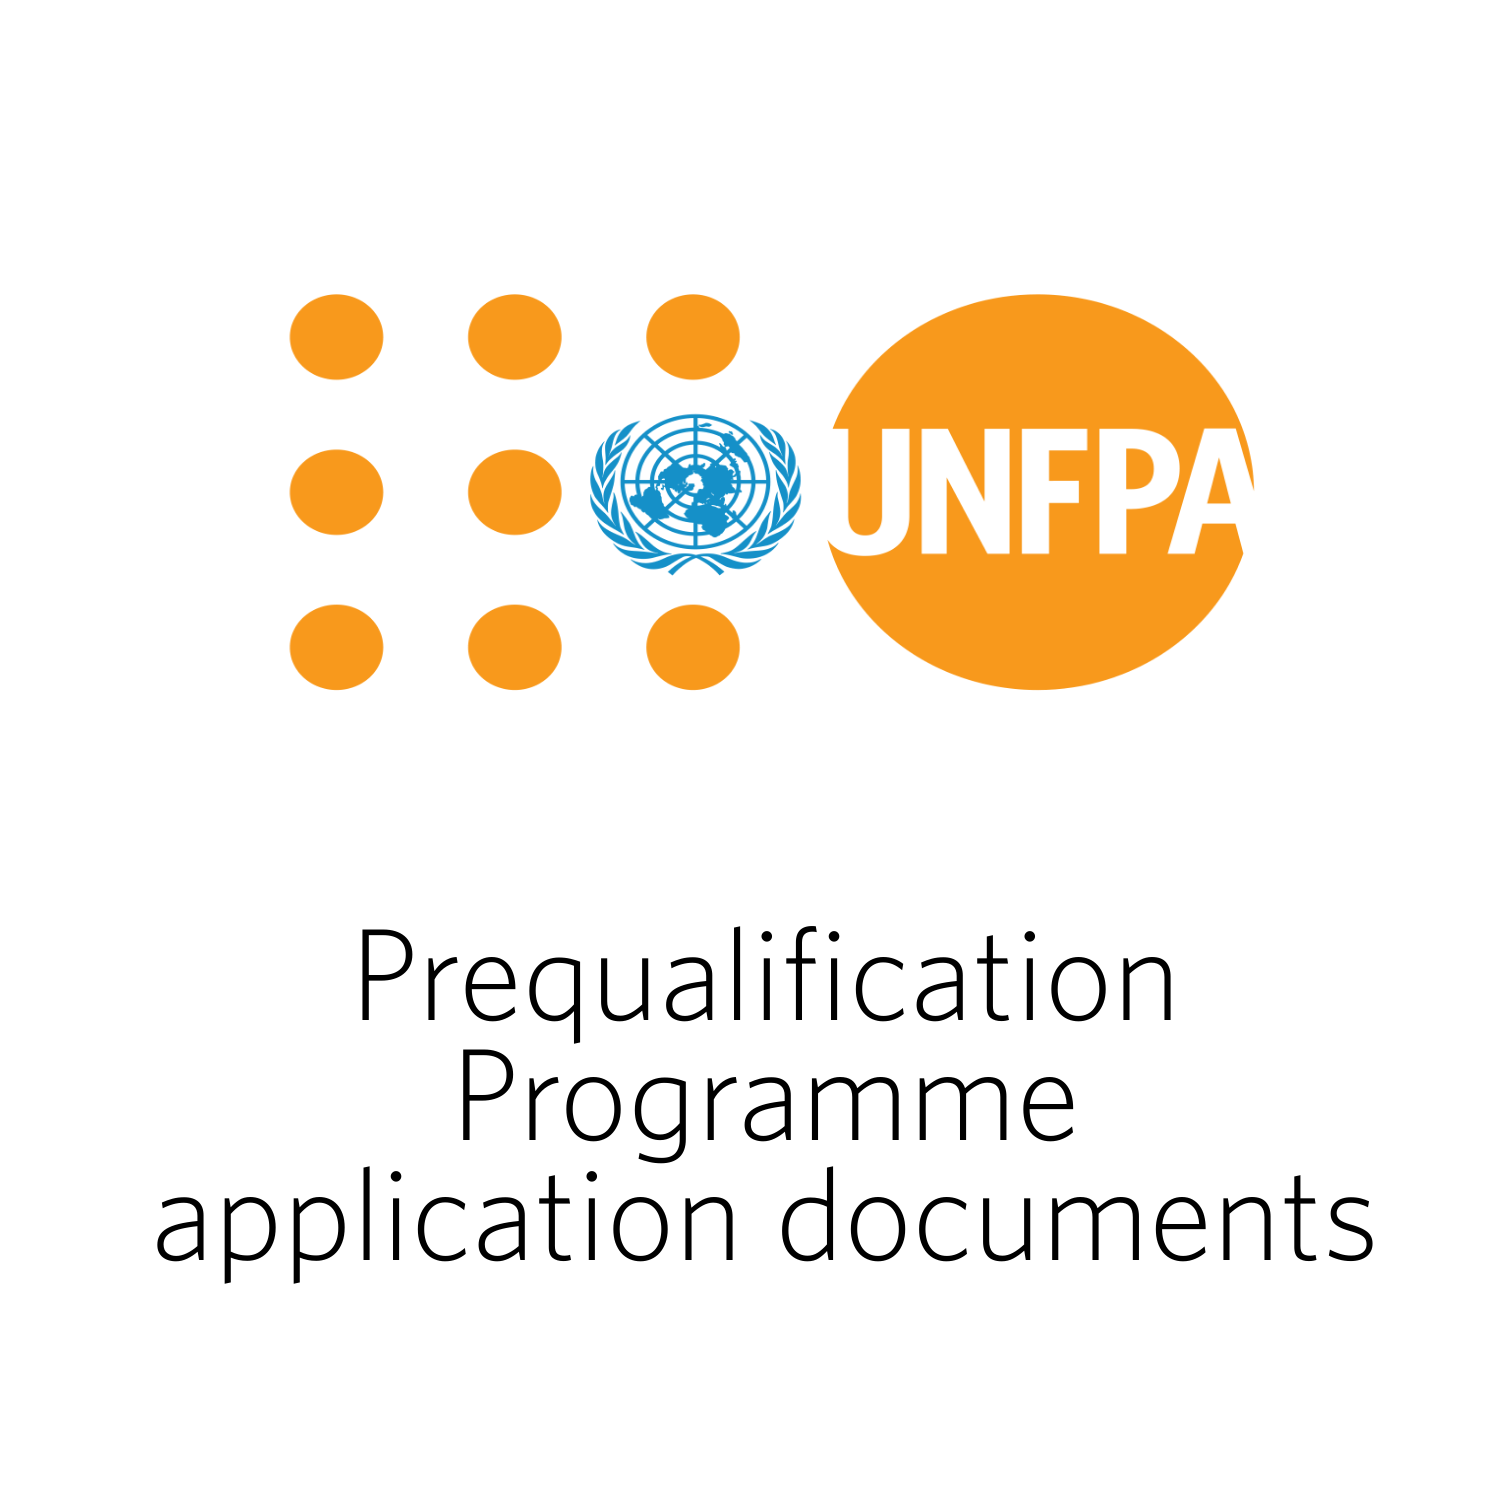 UNFPA Prequalification Programme application documents